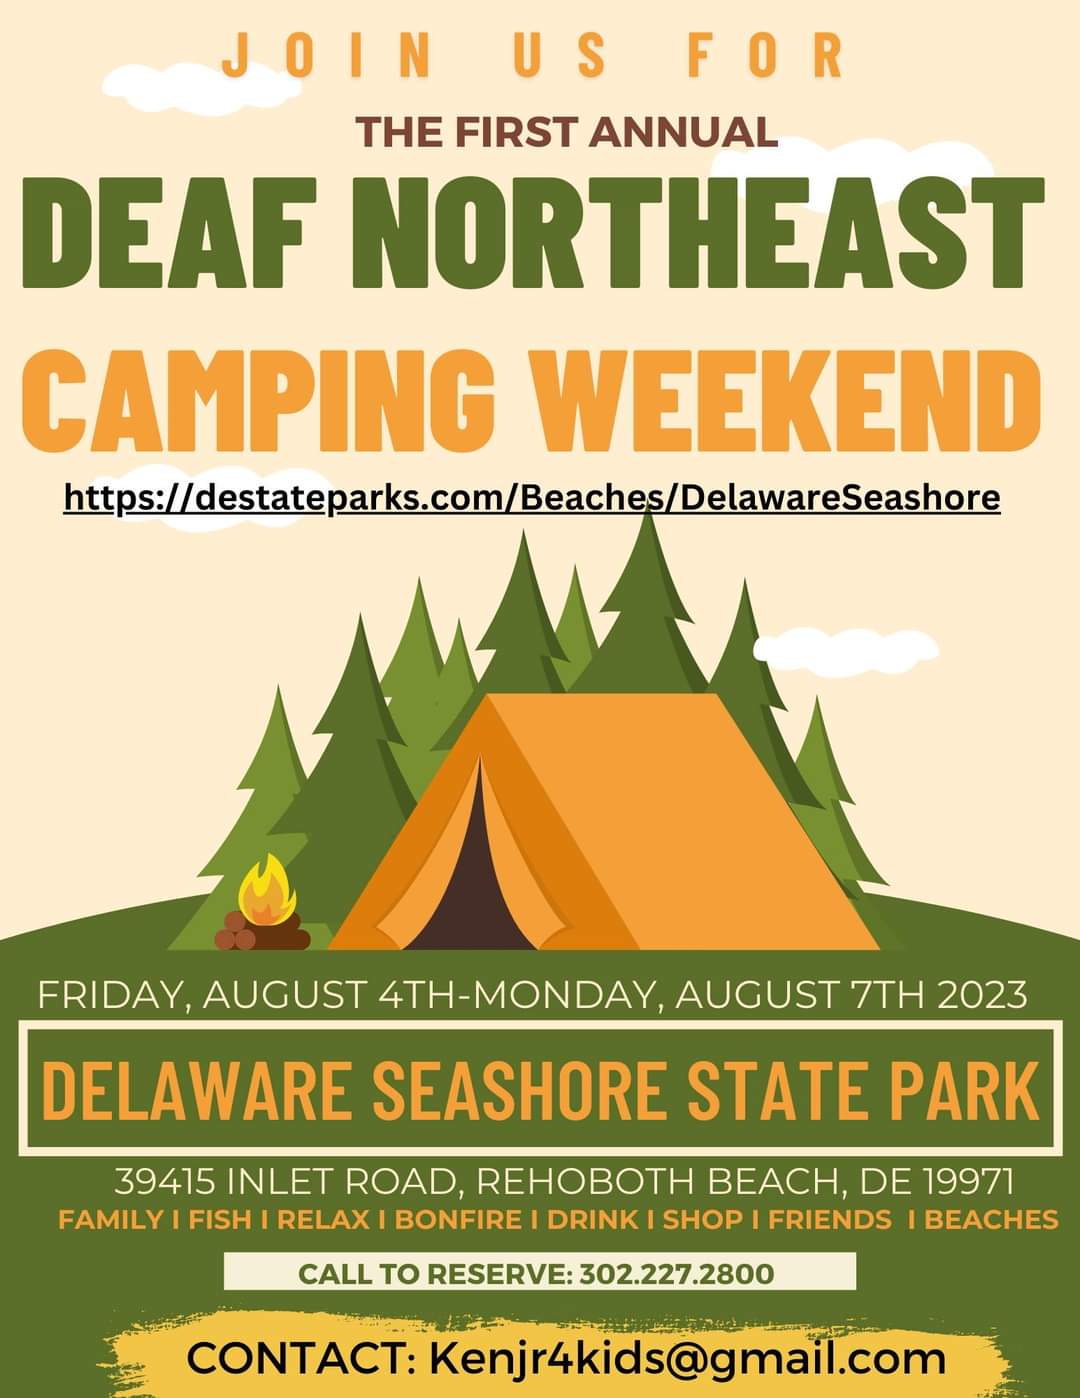 Deaf NorthEast Camping Weekend at Delaware Seashore State Park in Rehoboth Beach on Aug 4-7.  Questions, kenjr4kids@gmail.com.  